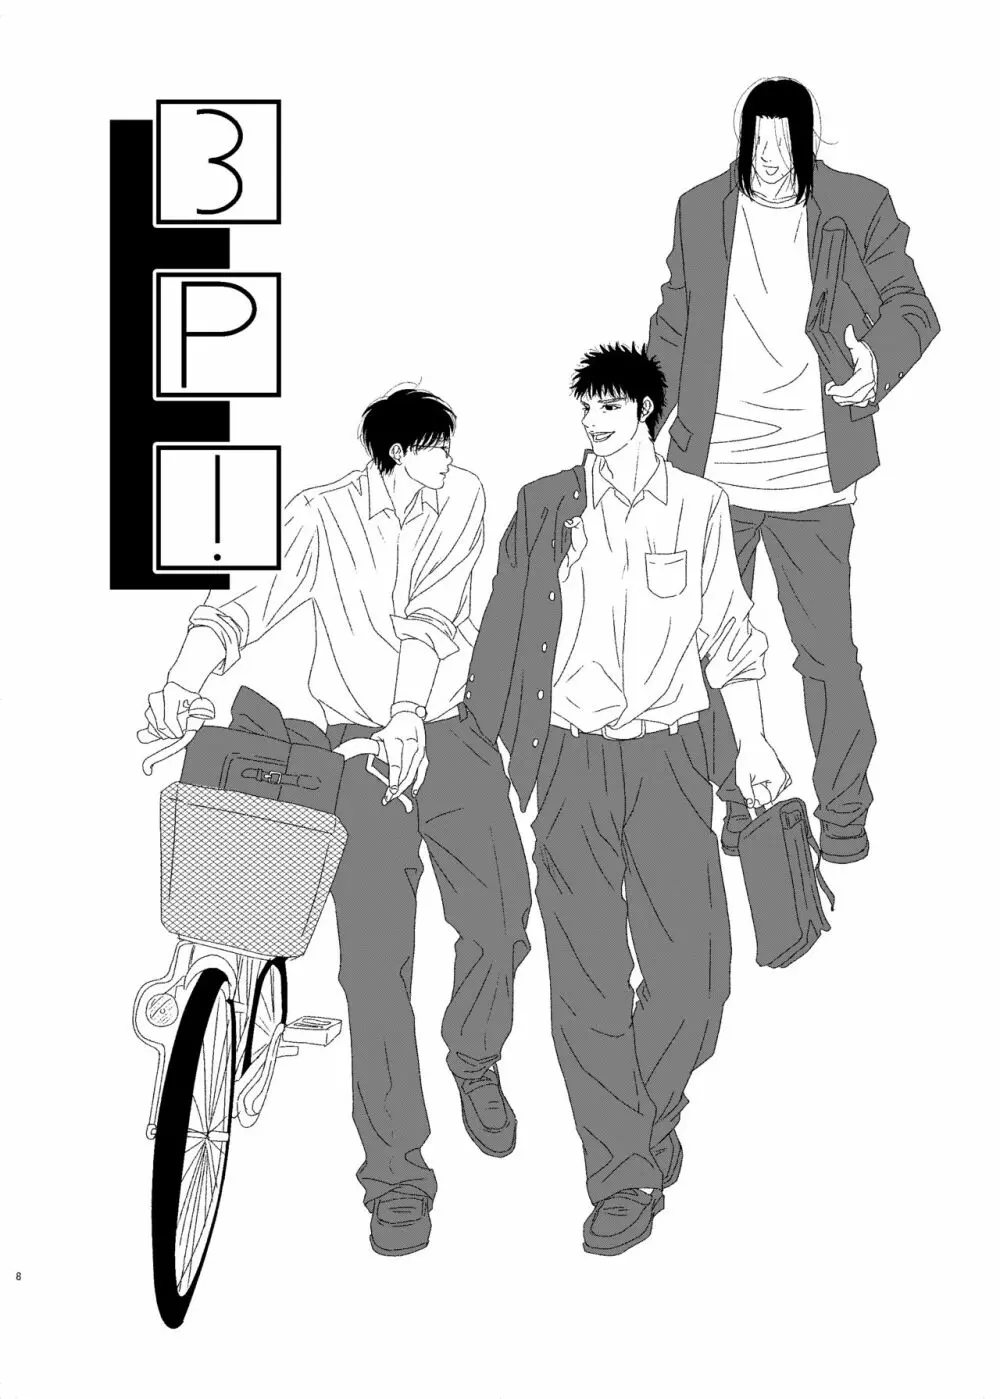 3P！～If he was a twin～ 9ページ